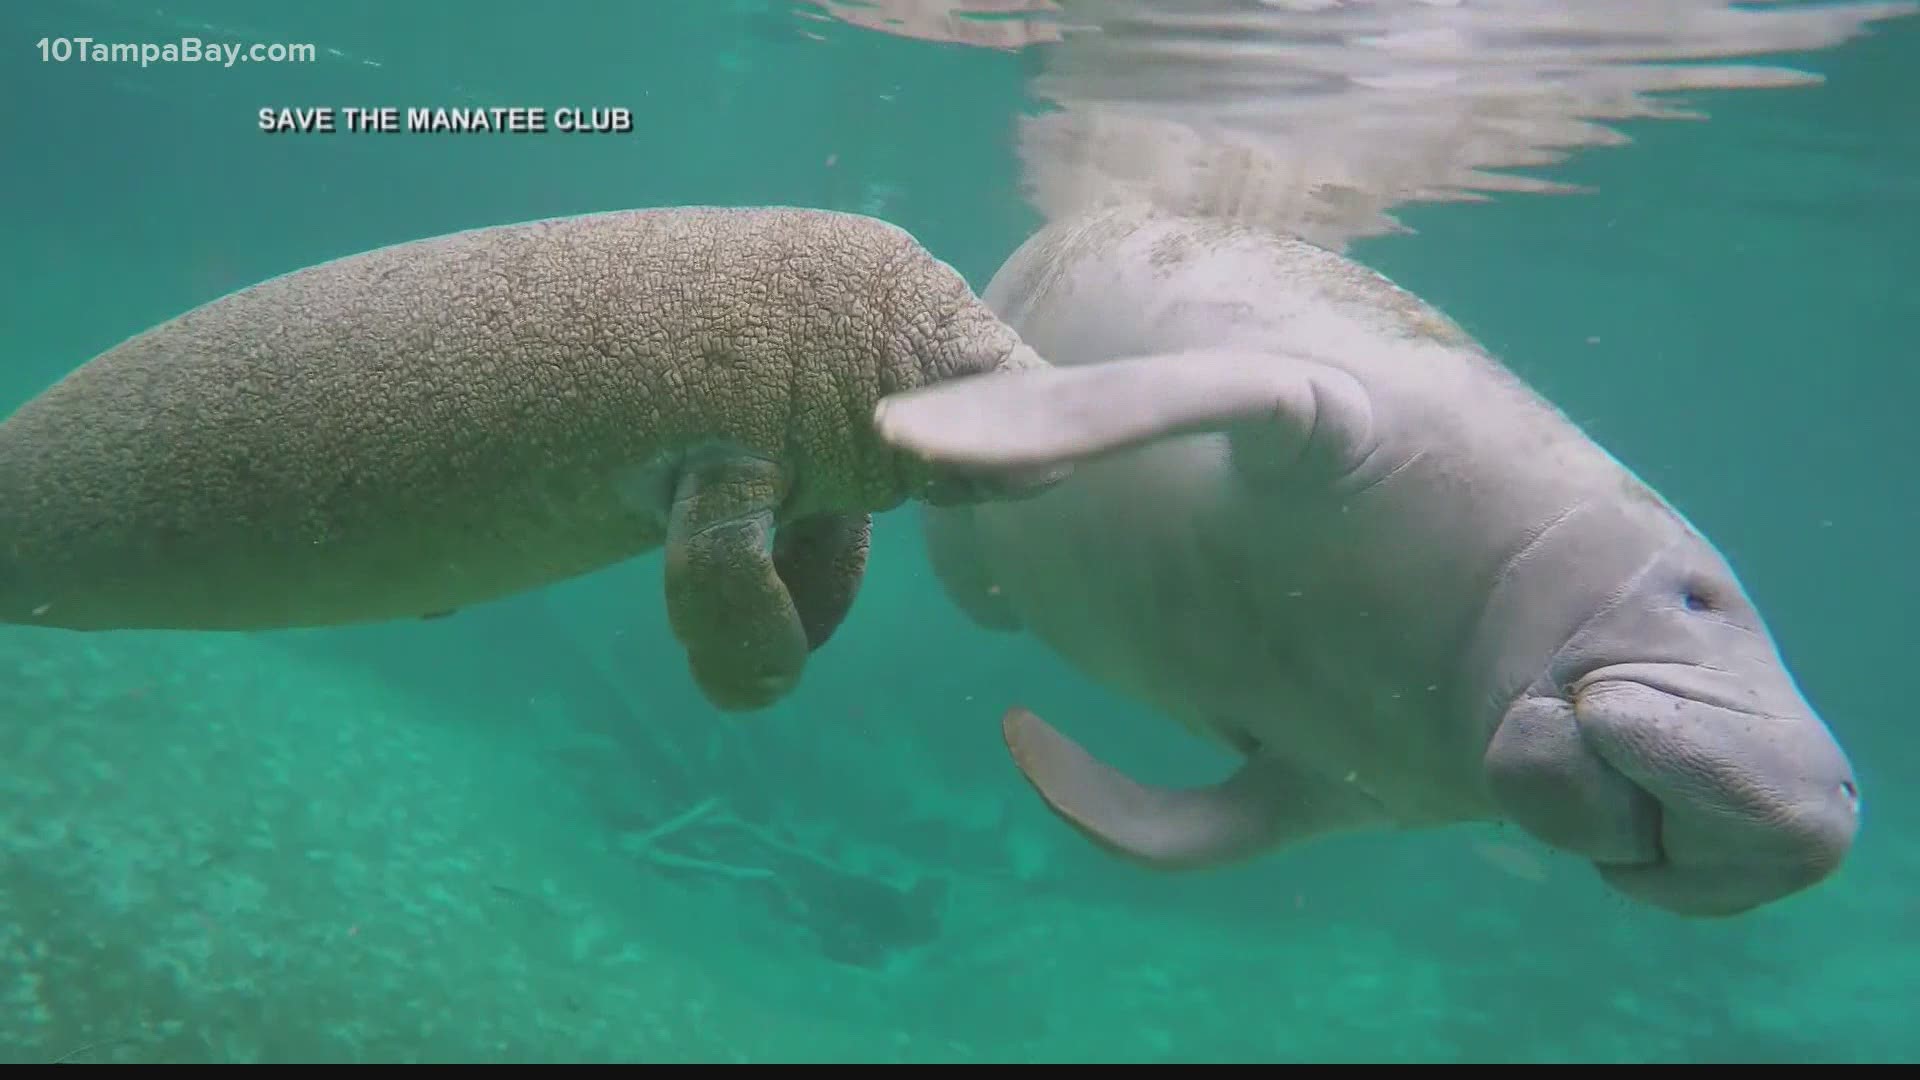 The rescue and rehab facility is working to create extra space for manatees in need of care at an off-site location in Tarpon Springs.